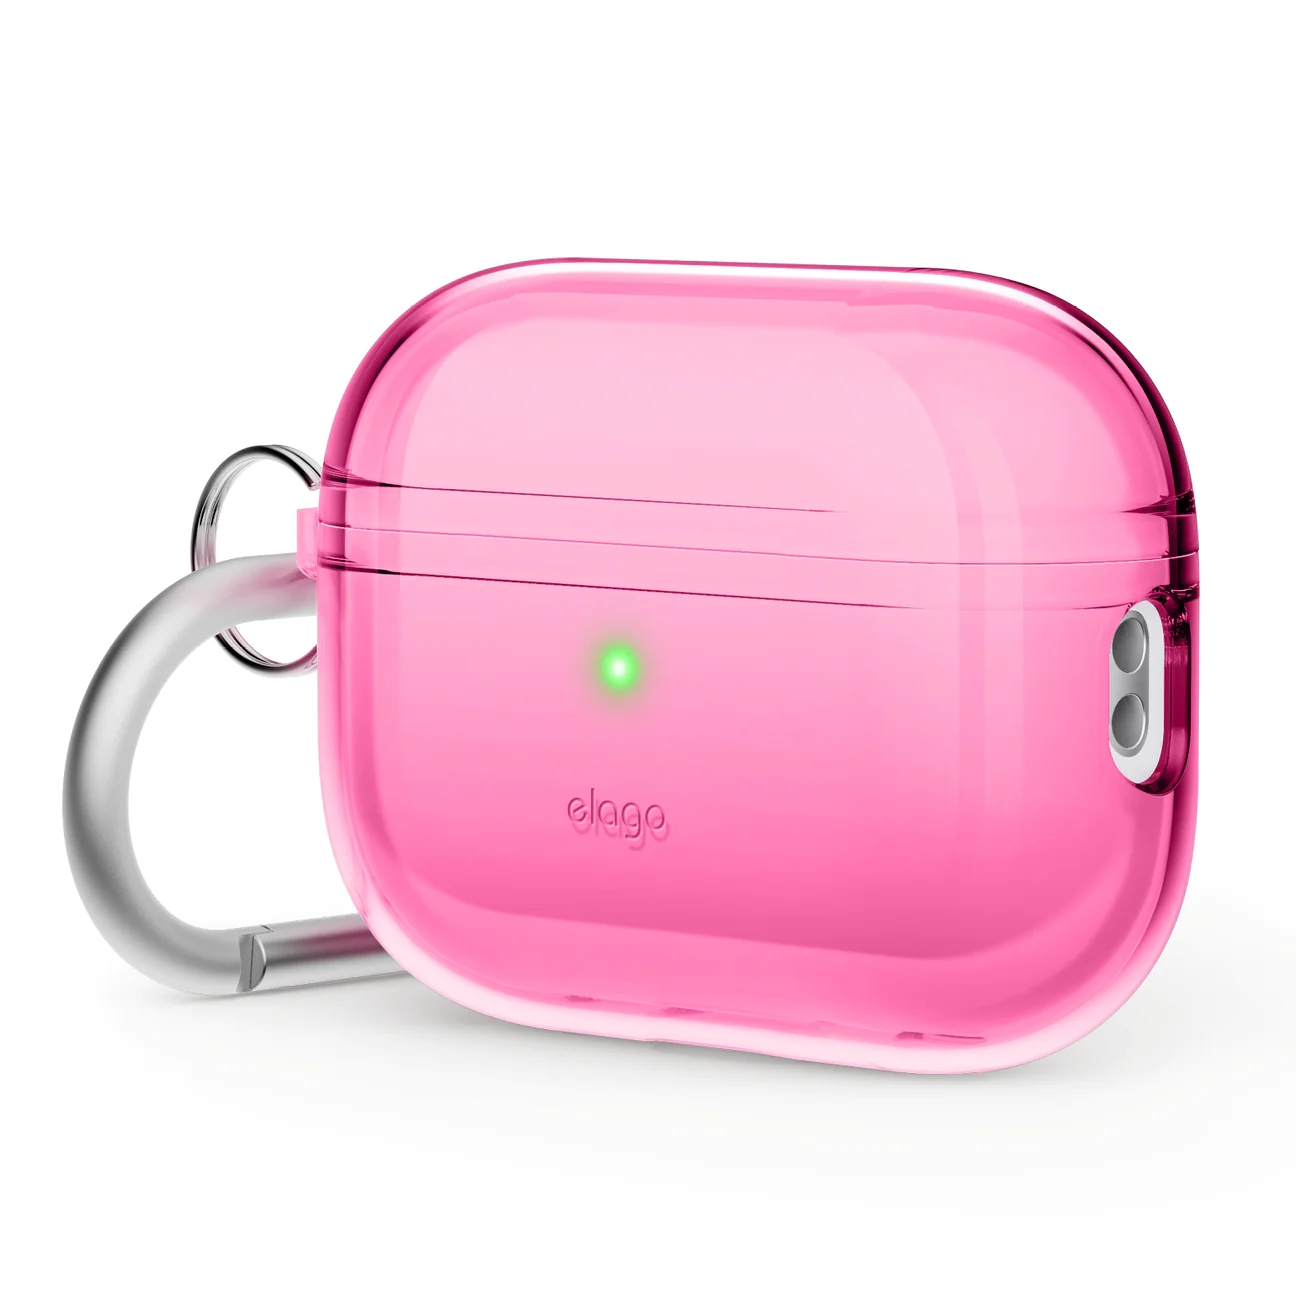 Elago Clear Hang case for AirPods Pro 2 - Neon Hot Pink (EAPP2CL-HANG-NHP)